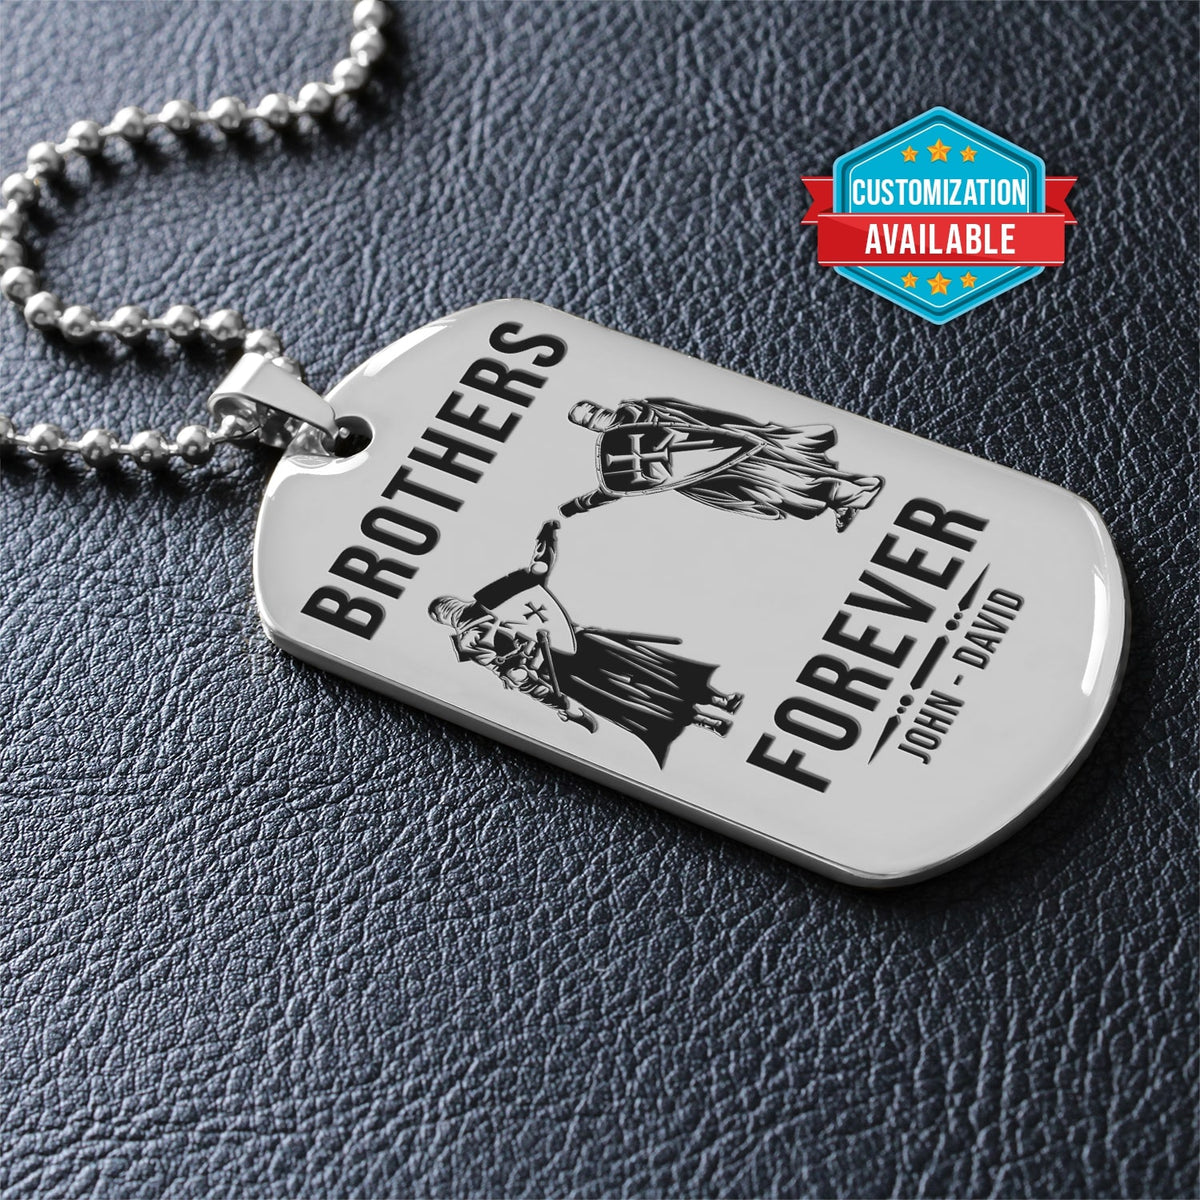 KTD026 - Brothers Forever - It's About Being Better Than You Were The Day Before - Knights Templar - Silver Double-Sided Dog Tag